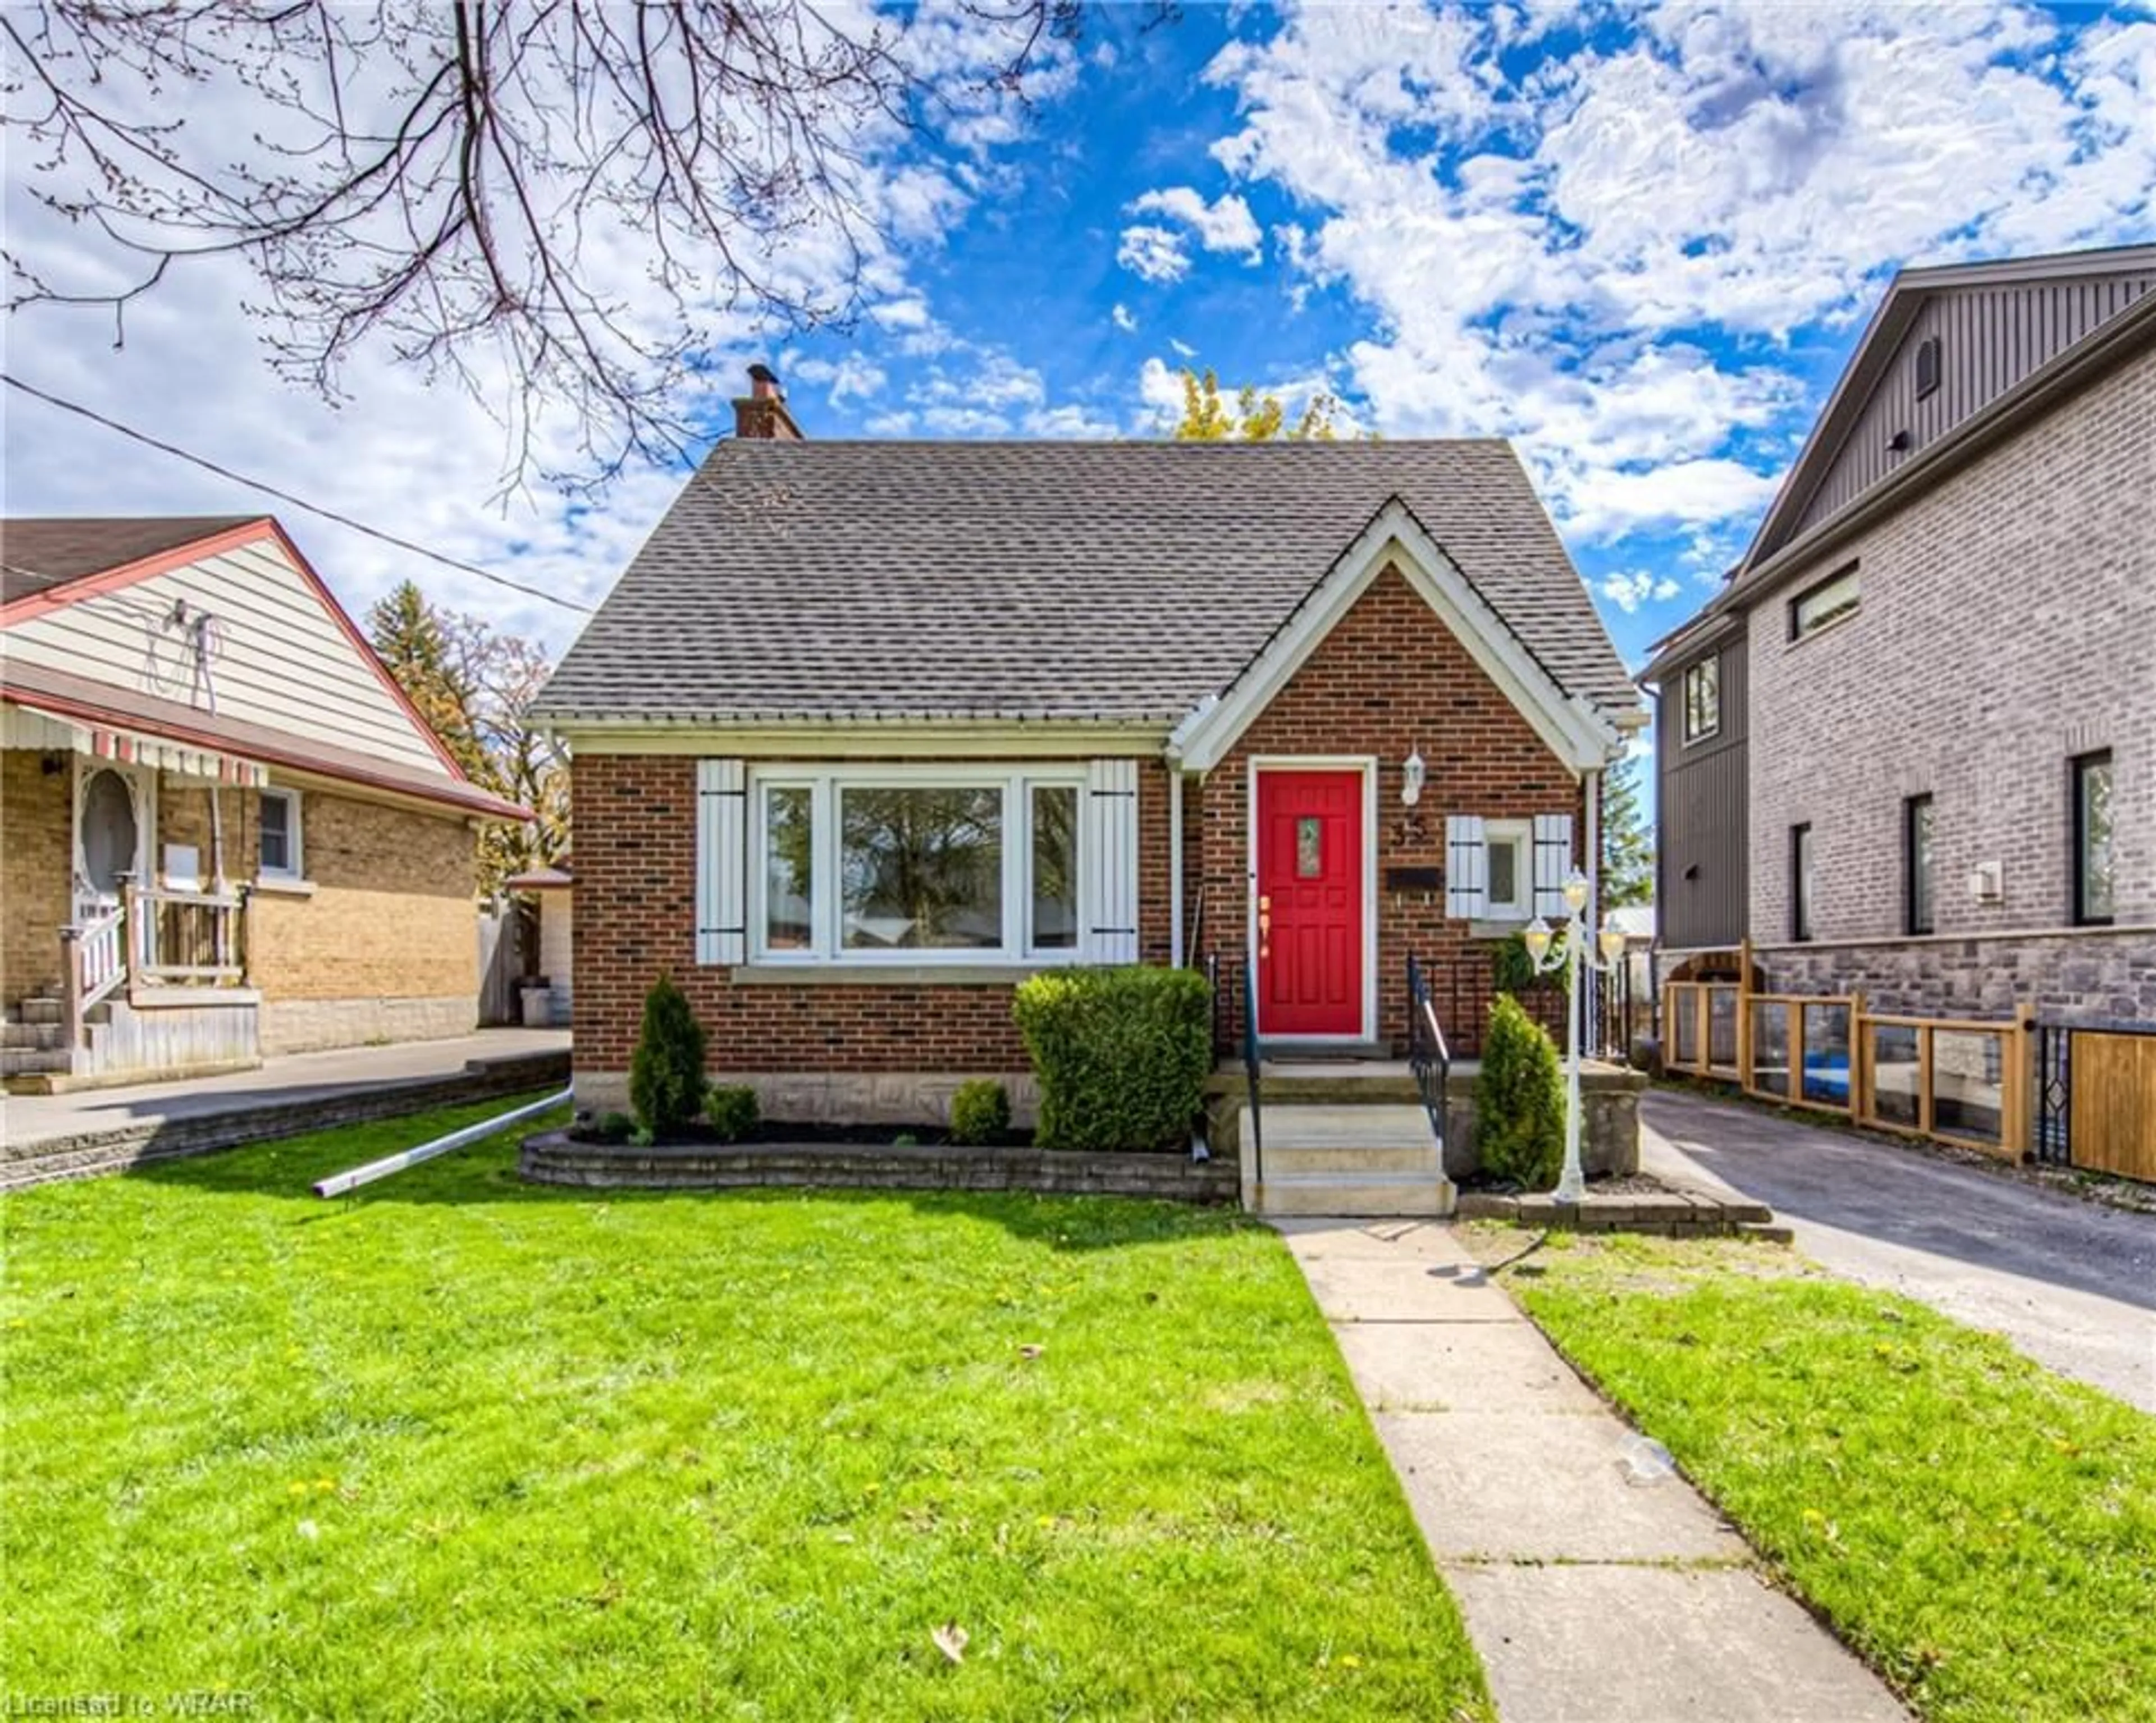 Frontside or backside of a home for 35 Pattandon Ave, Kitchener Ontario N2M 3S6